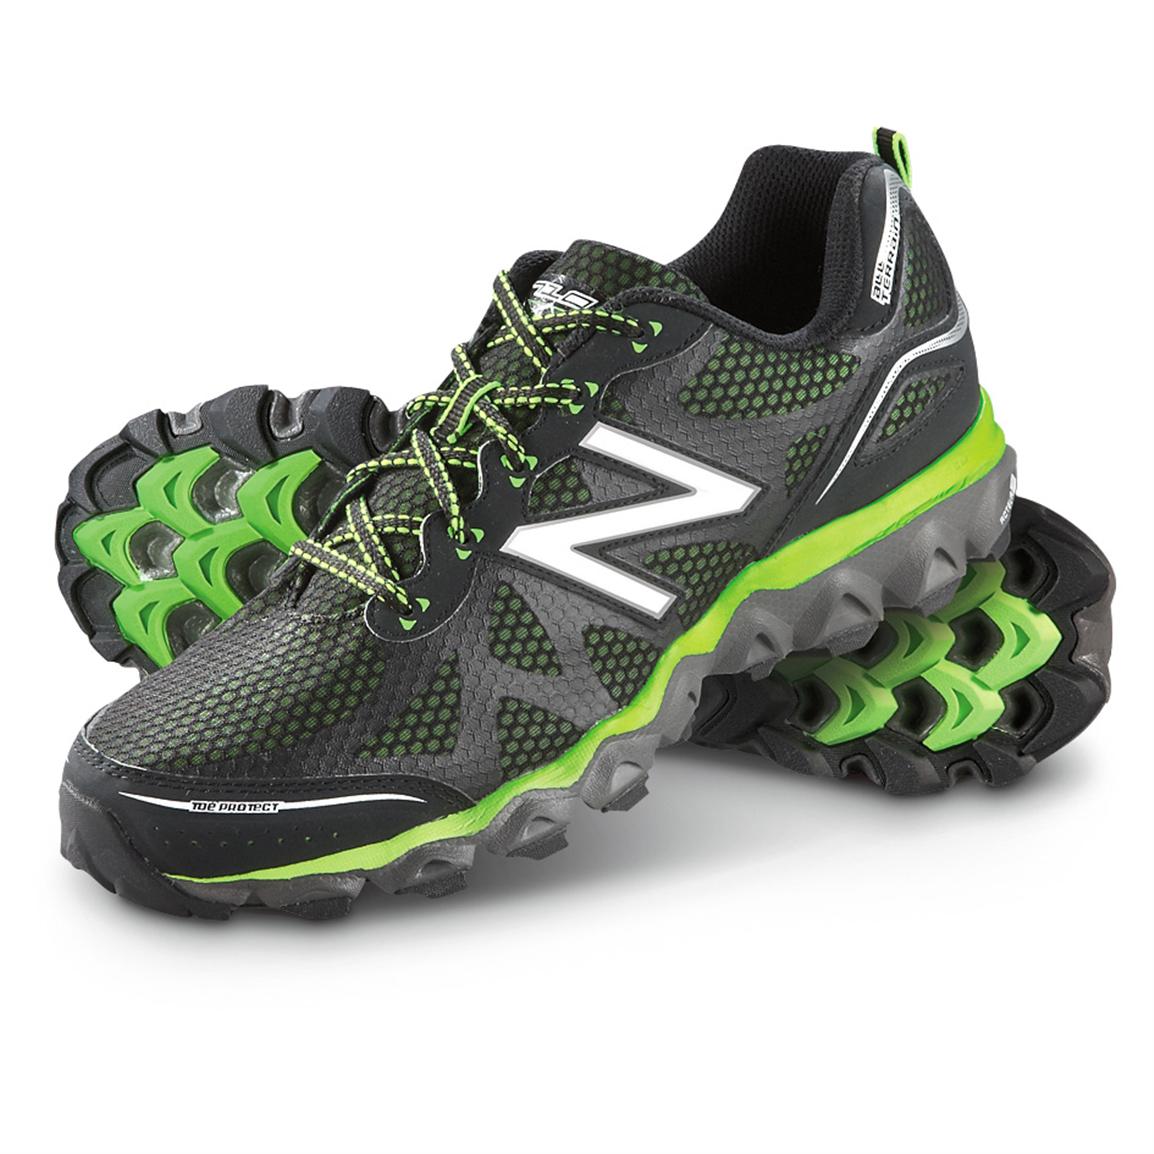 Men's New Balance 710v2 Trail Running Shoes - 591302, Running Shoes & Sneakers at Sportsman's Guide